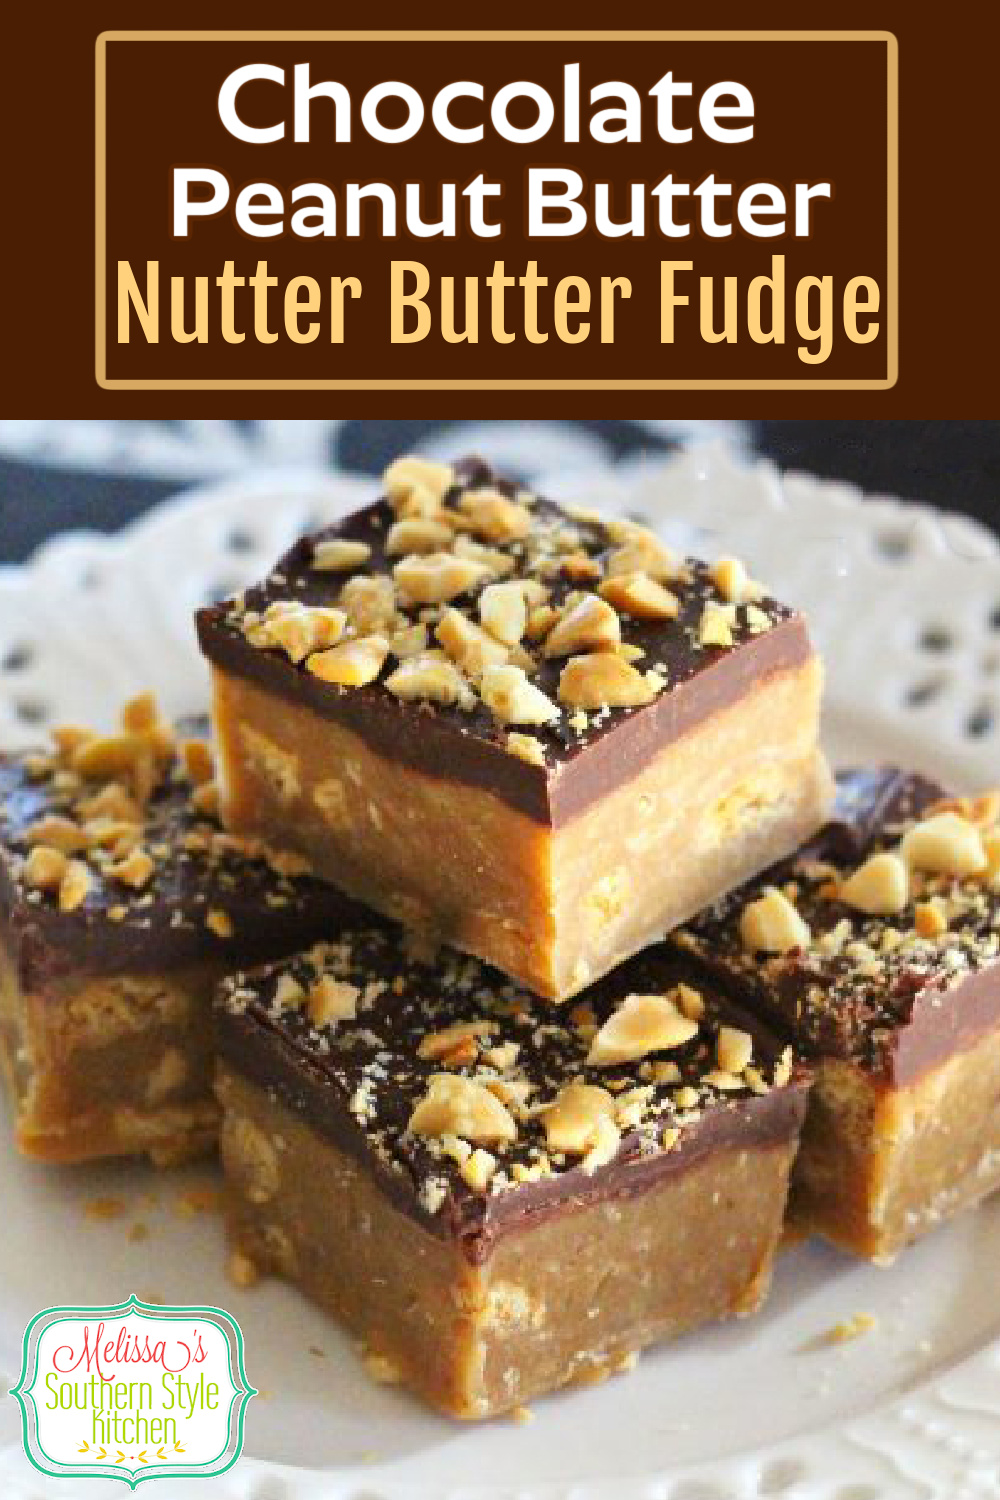 No candy thermometer is required to make this Chocolate Peanut Butter Nutter Butter Fudge #peanutbutterfudge #fudgerecipes #sweet #desserts #dessertfoodrecipes #peanutbutter #peanuts #southernrecipes #southernfood #melissassouthernstylekitchen via @melissasssk